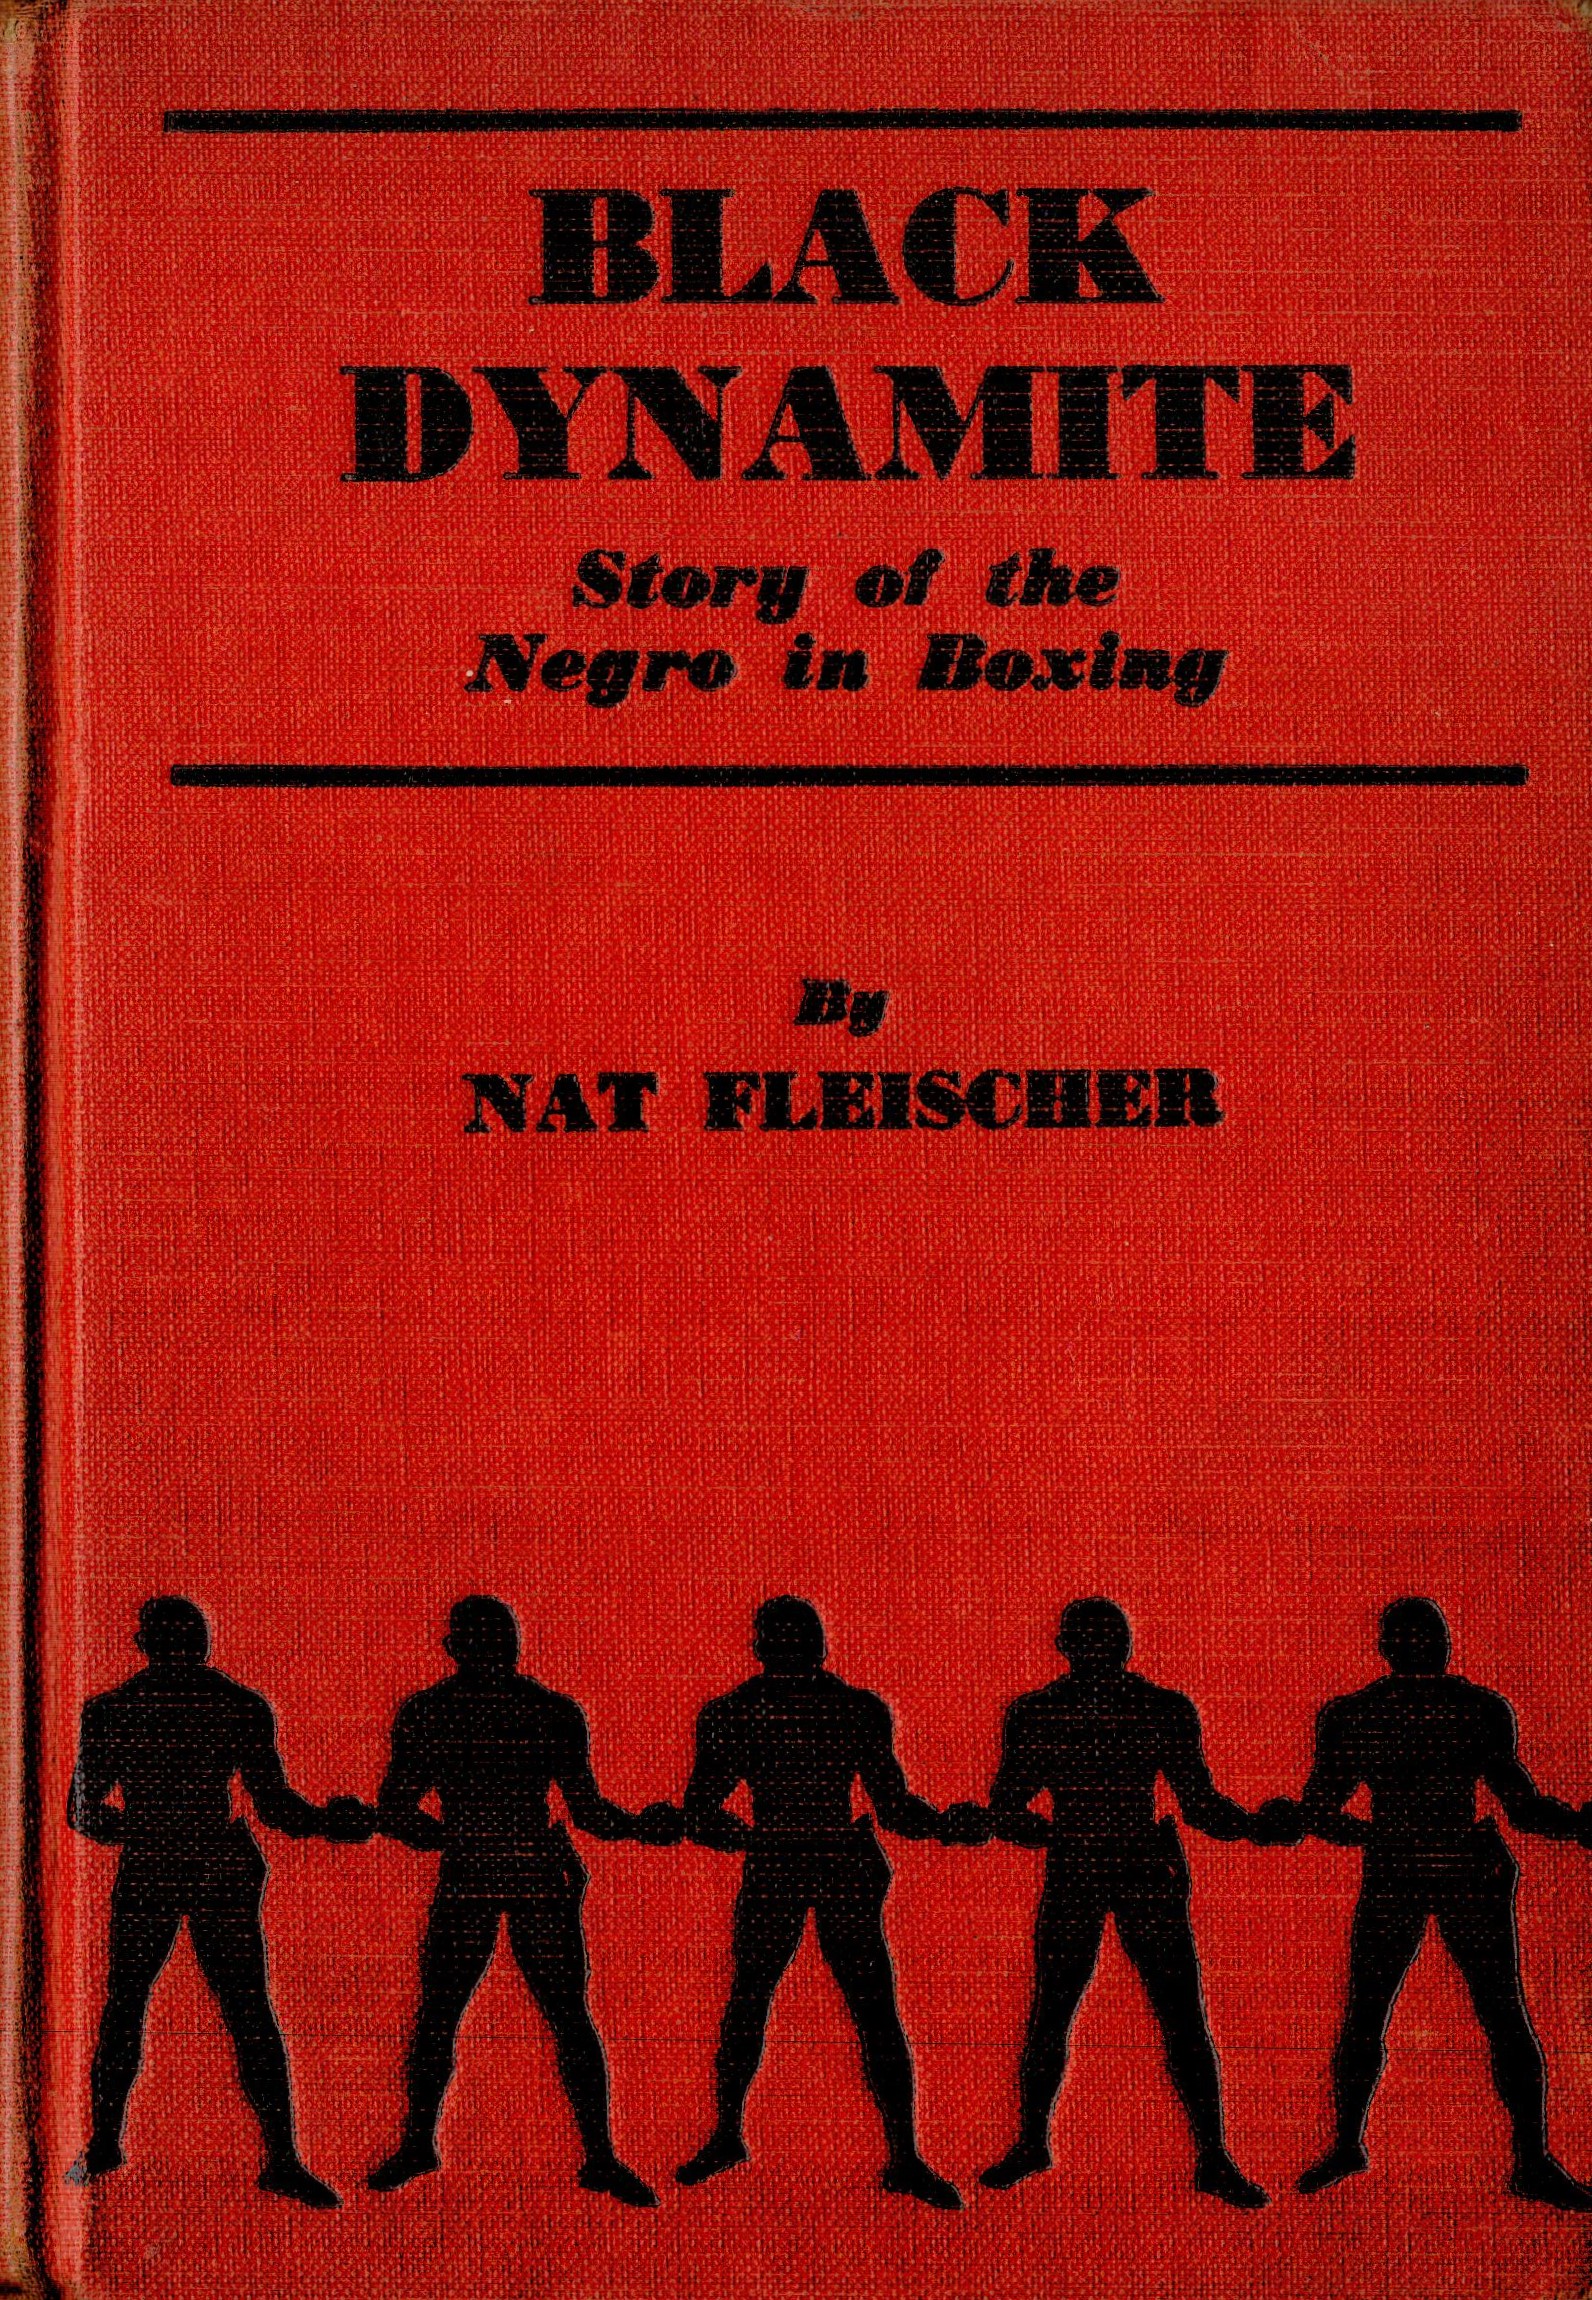 Black Dynamite - Story of the Negro in Boxing vol 1 by Nat Fleischer 1938 First Edition Hardback